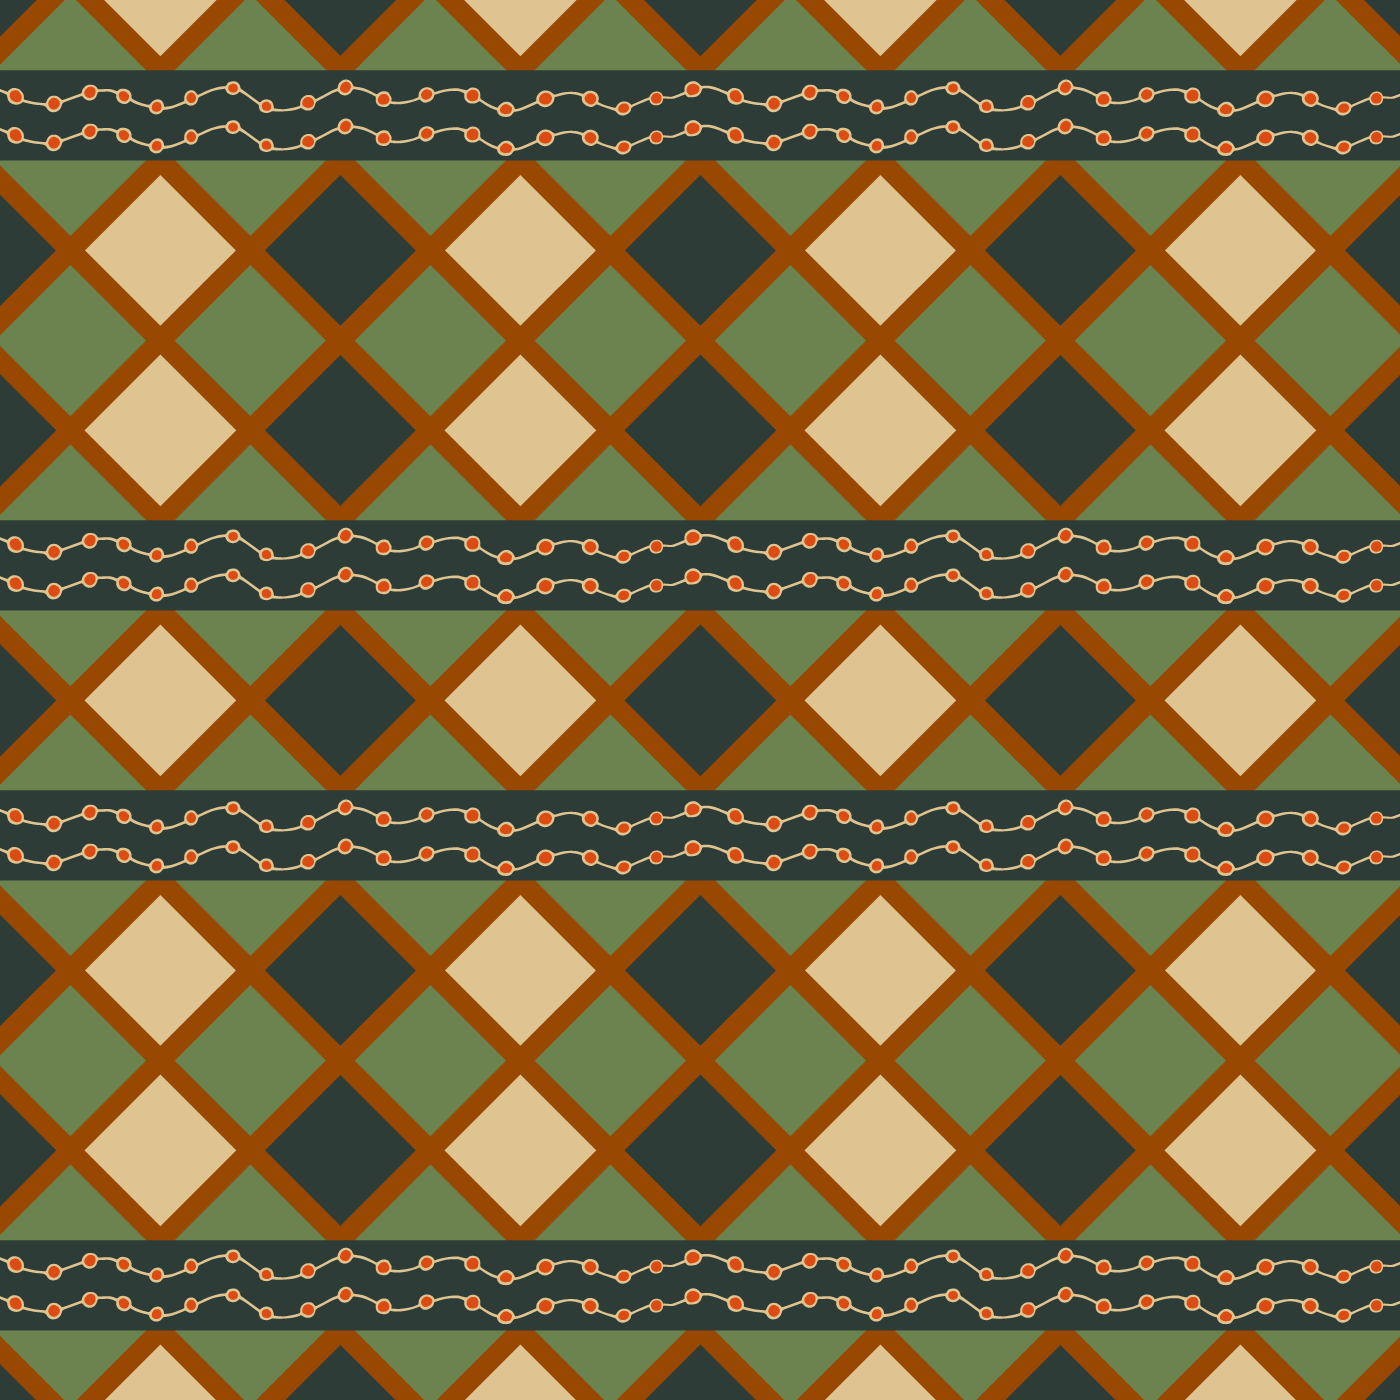 Patchwork Diamonds in Woodland Colors